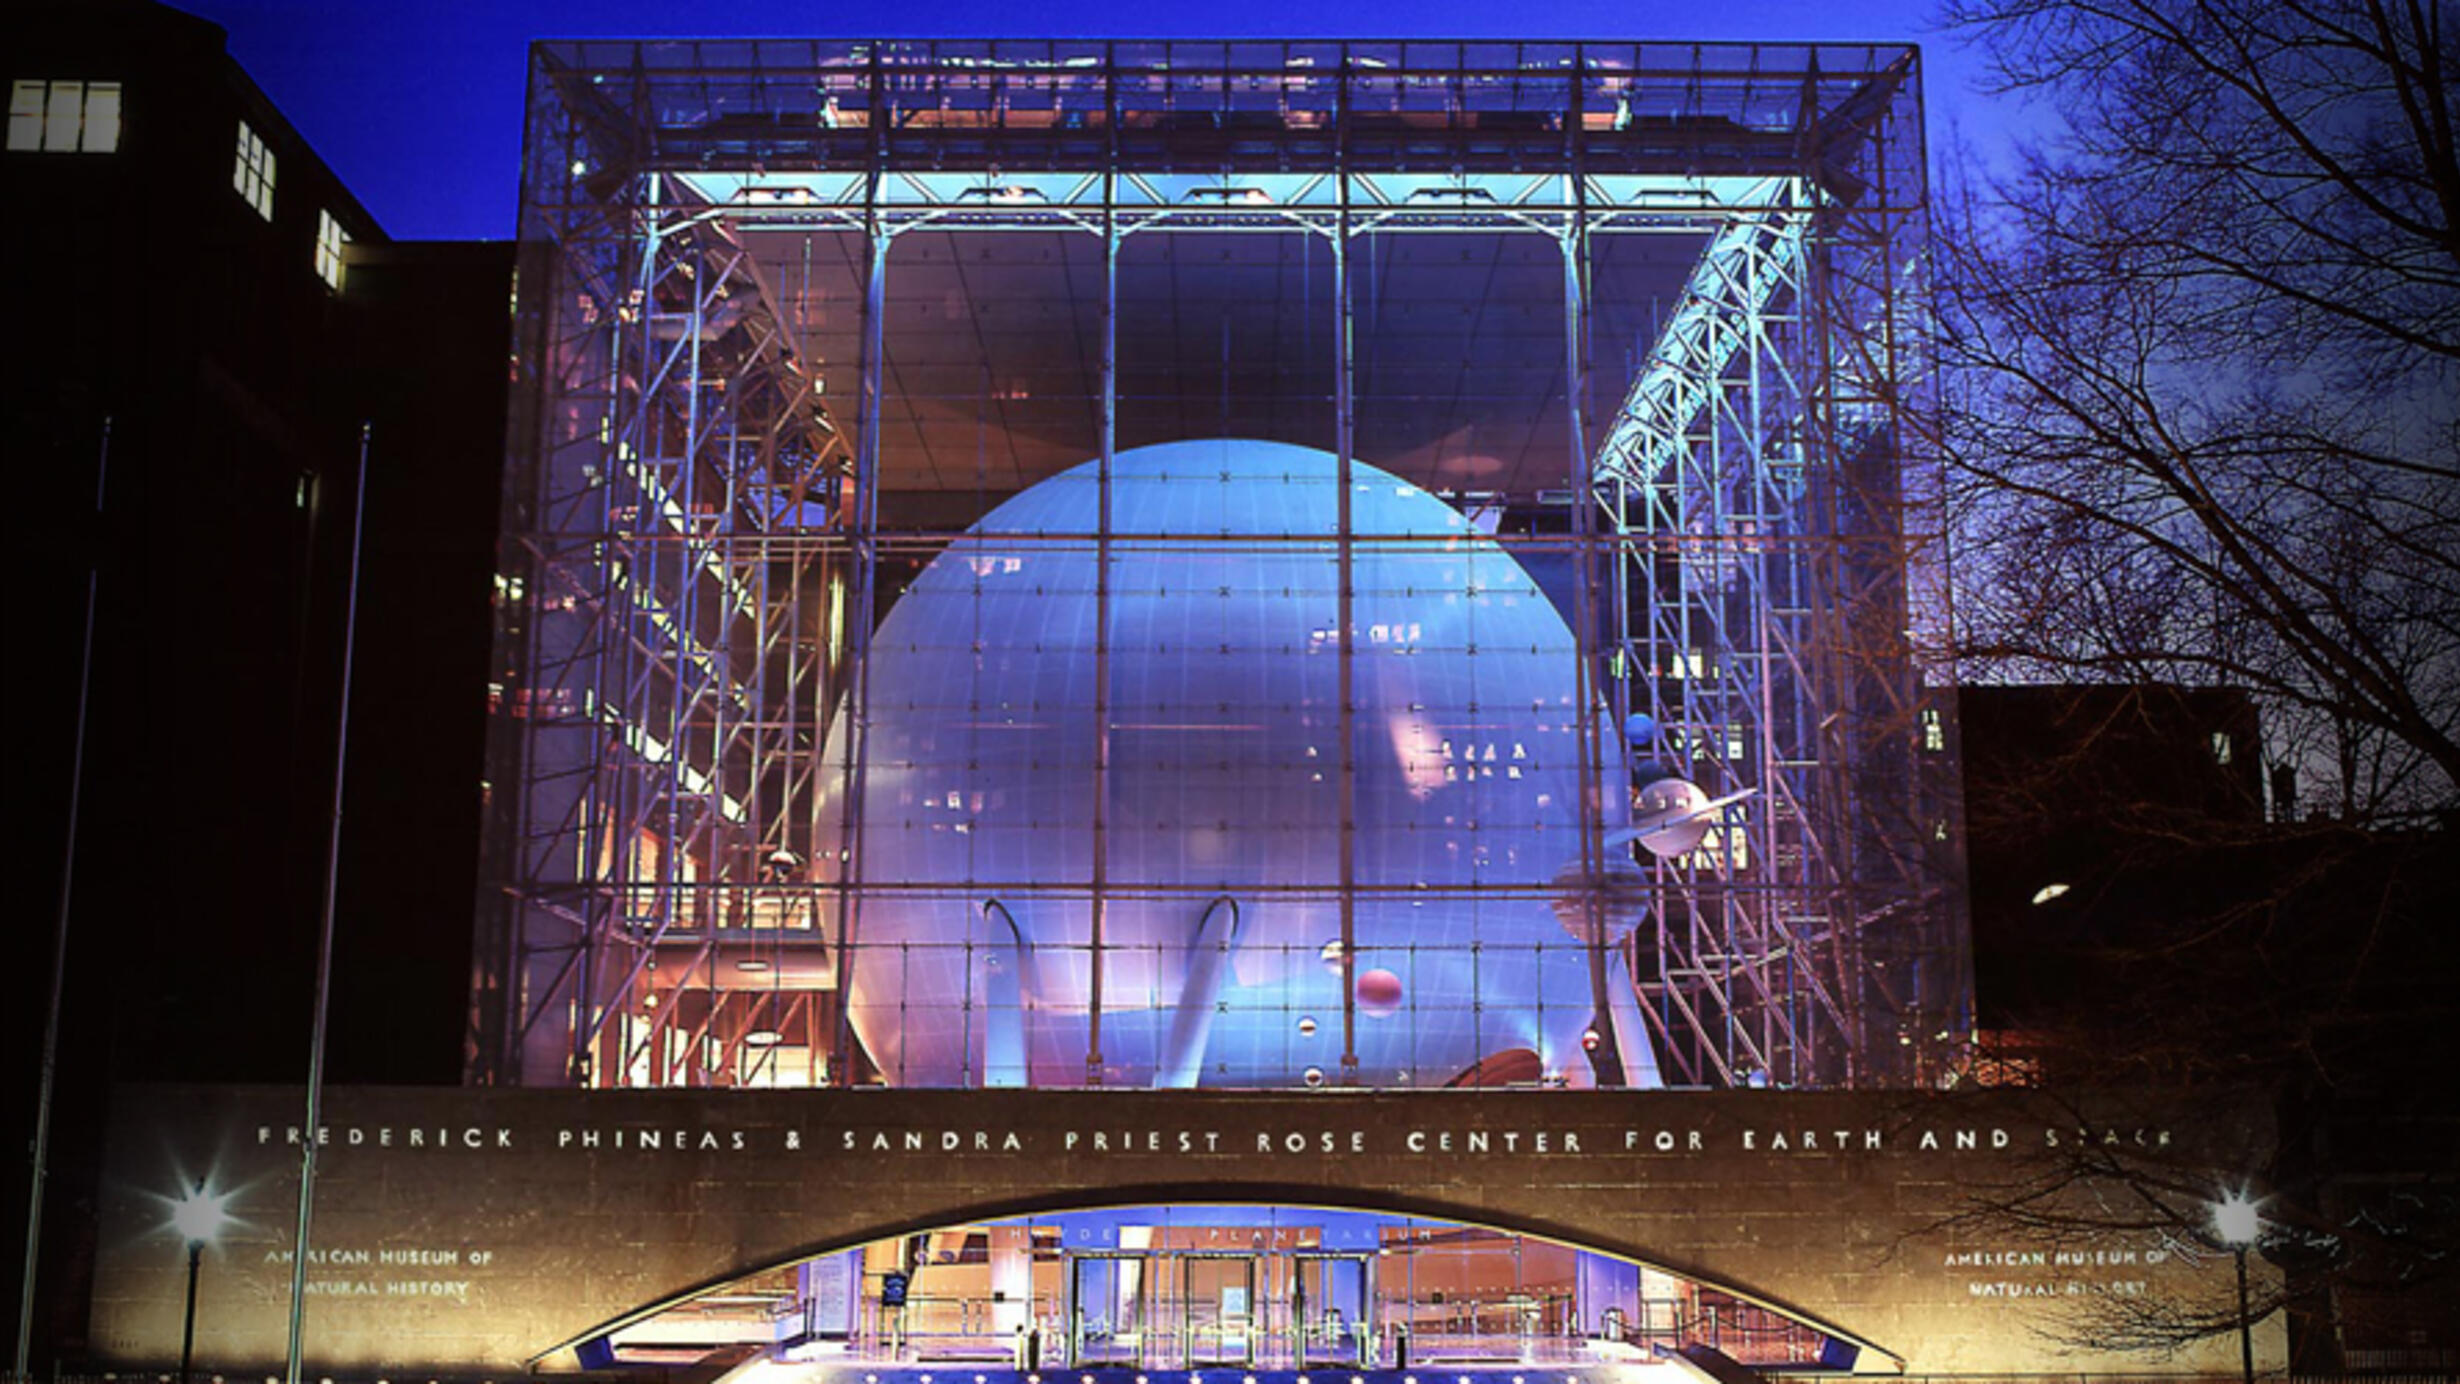 The Hayden Sphere inside the cubical Rose Center pictured from outside the entrance, illuminated at nighttime.